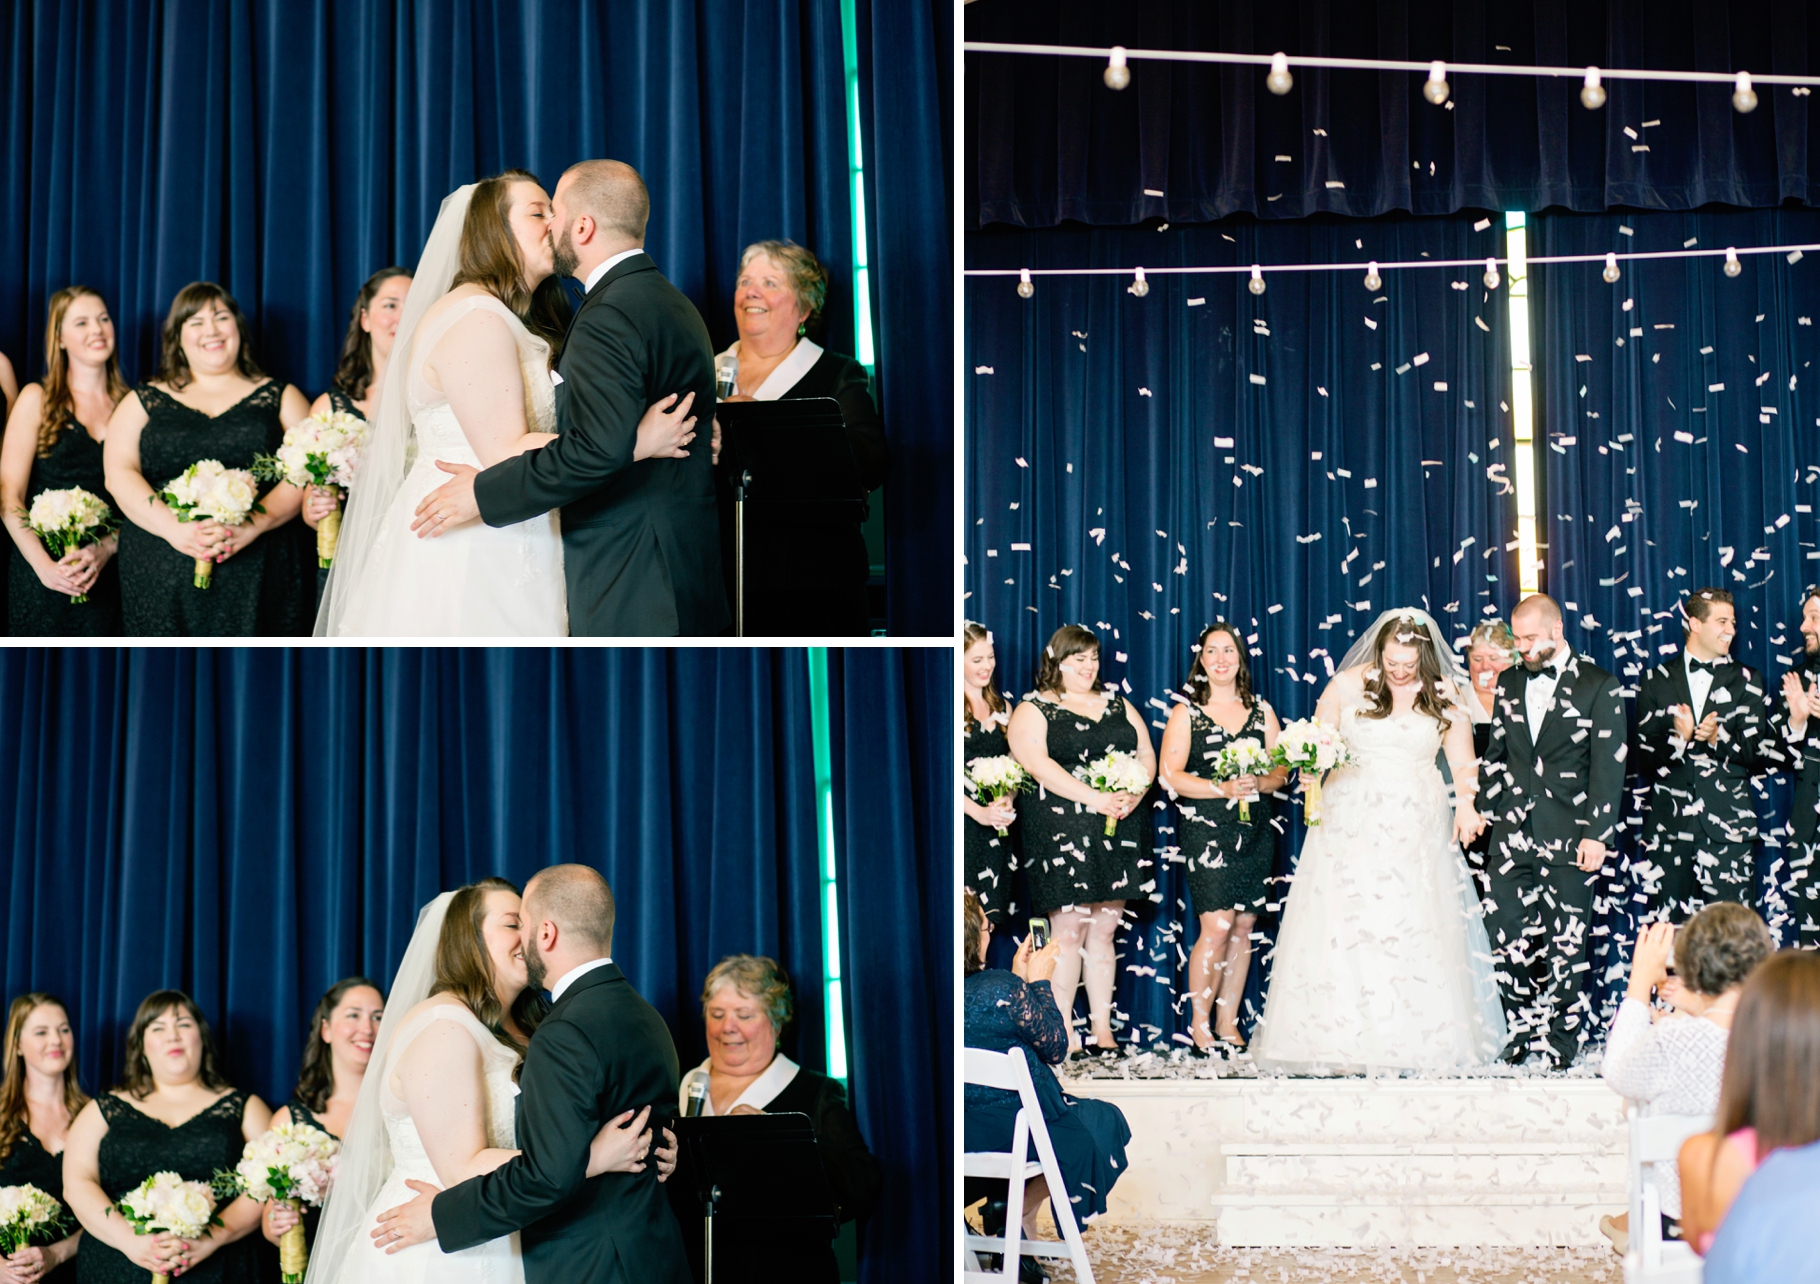 46-Bride-Groom-Ceremony-Photos-Confetti-Cannon-Great-Hall-Green-Lake-Seattle-Wedding-Photographer-Photography-by-Betty-Elaine